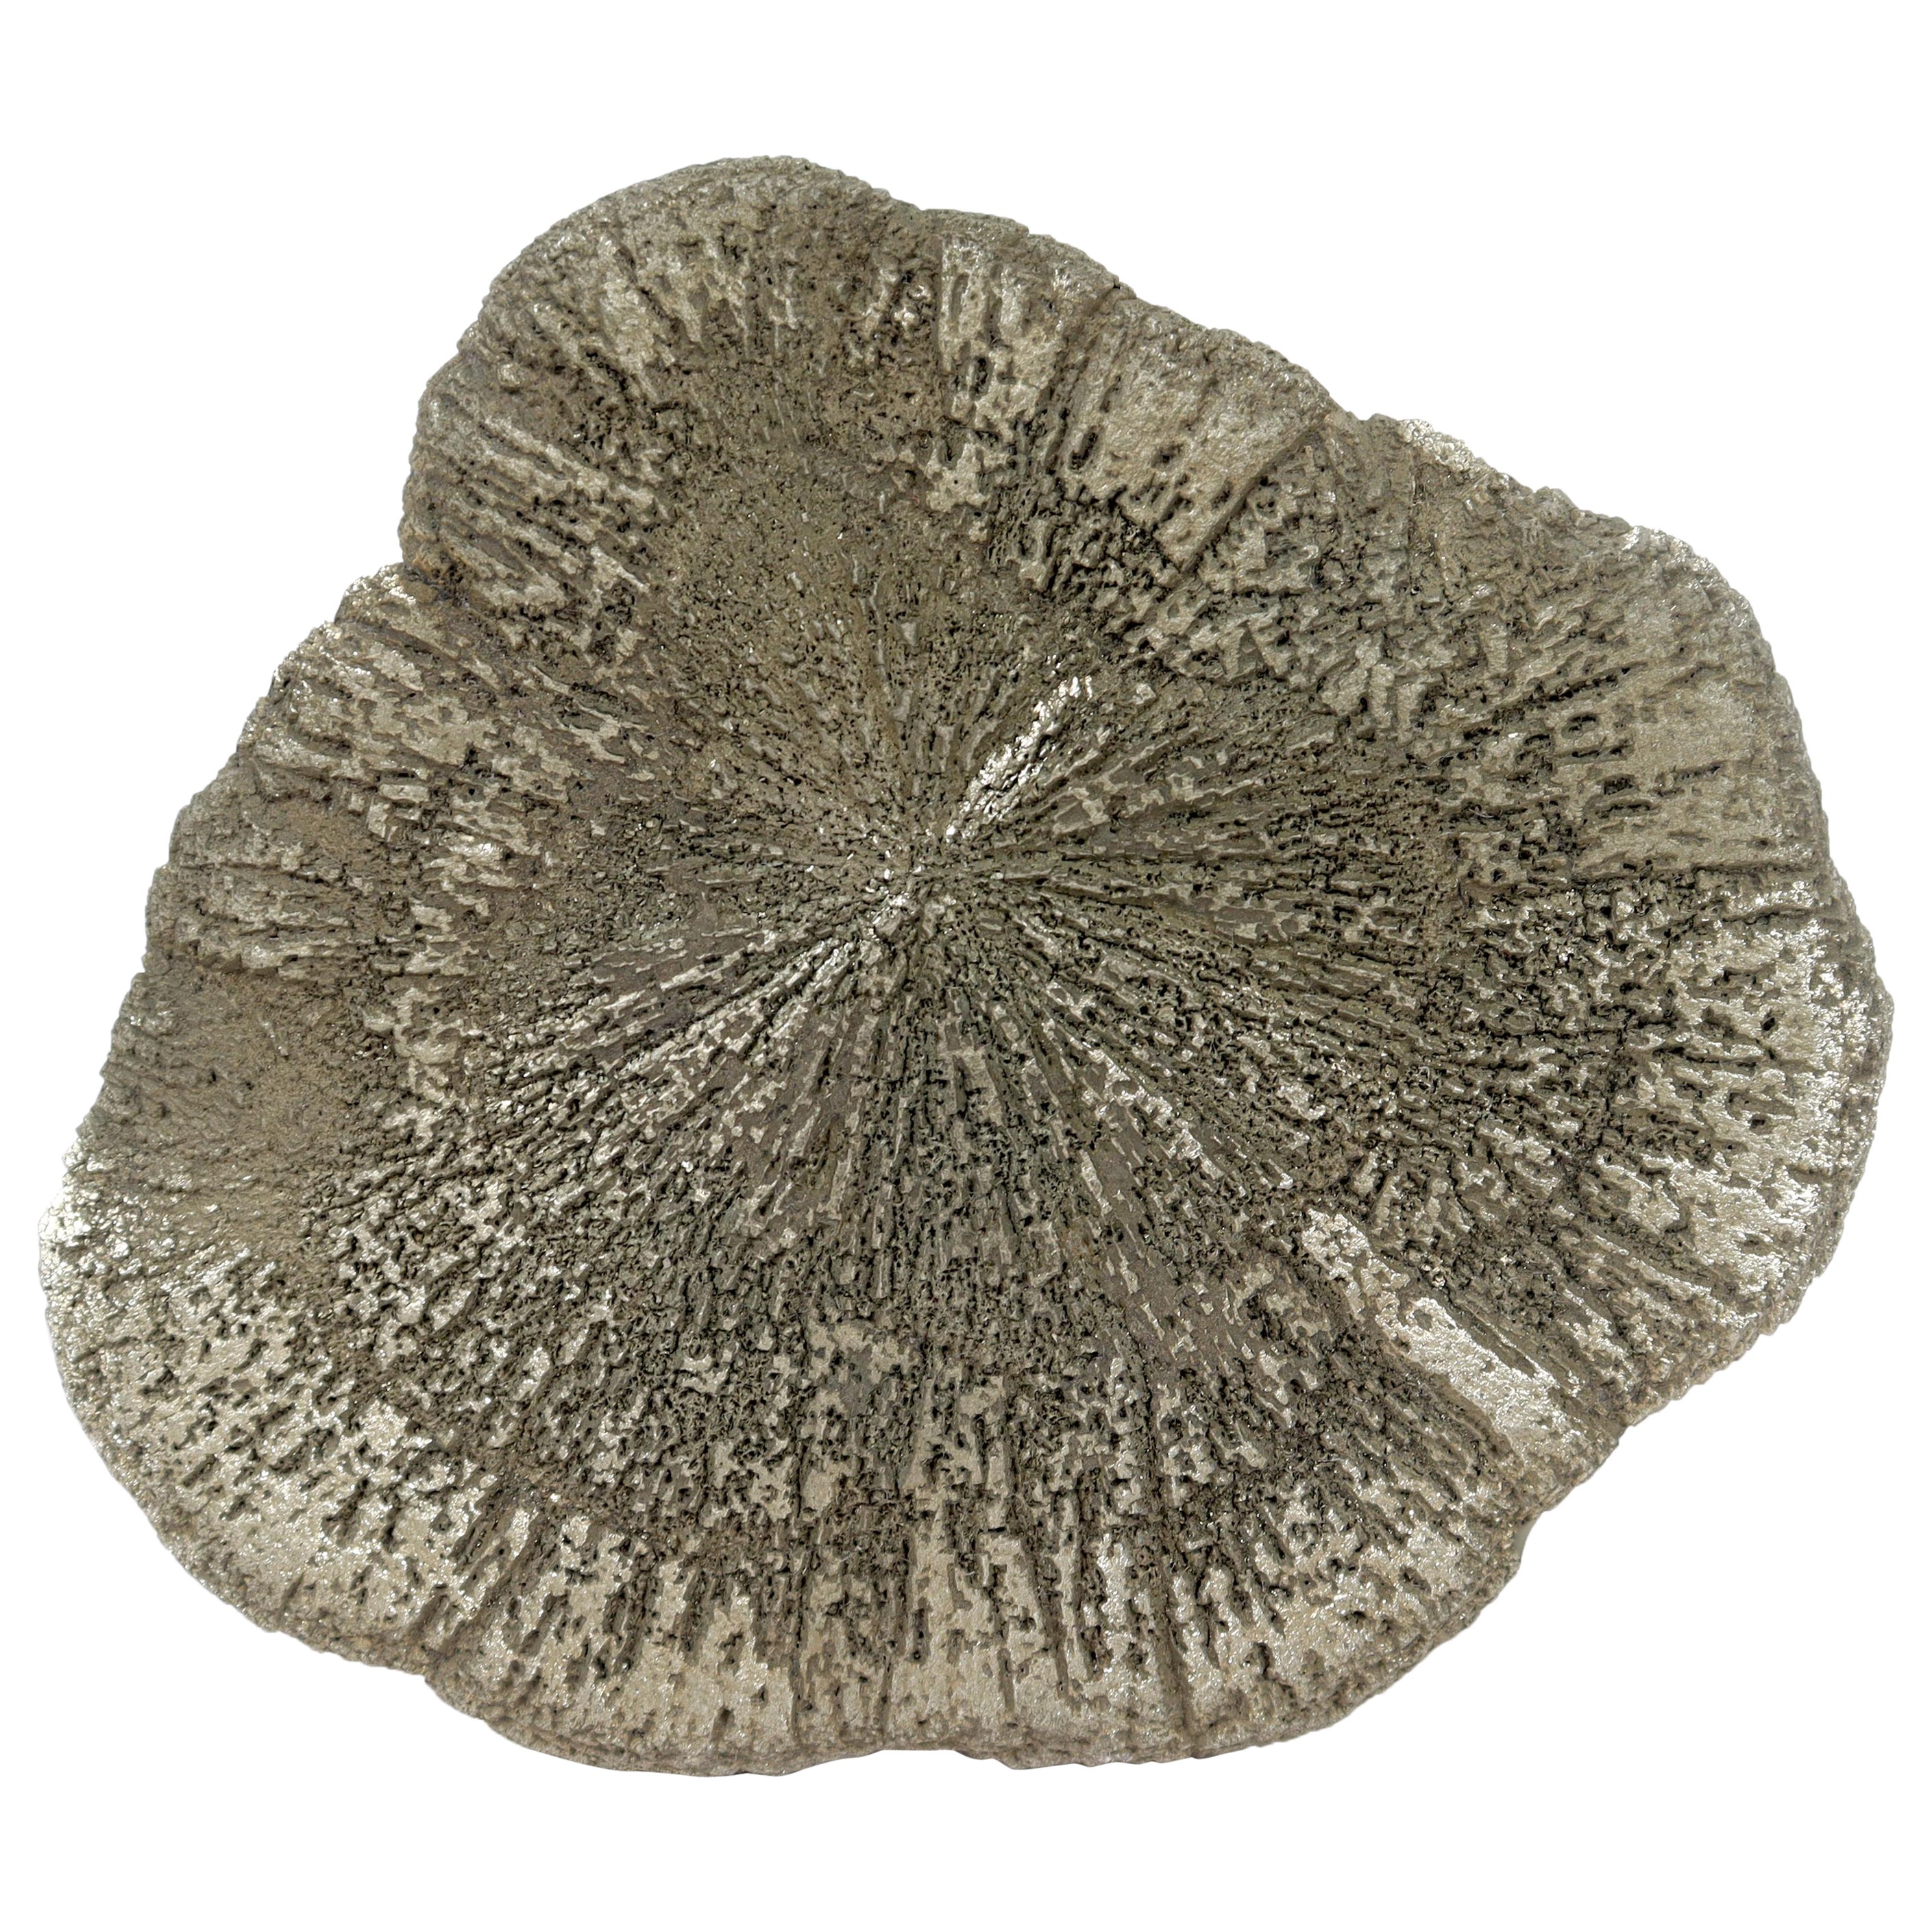 Flat Pyrite Crystal Specimen Paperweight For Sale